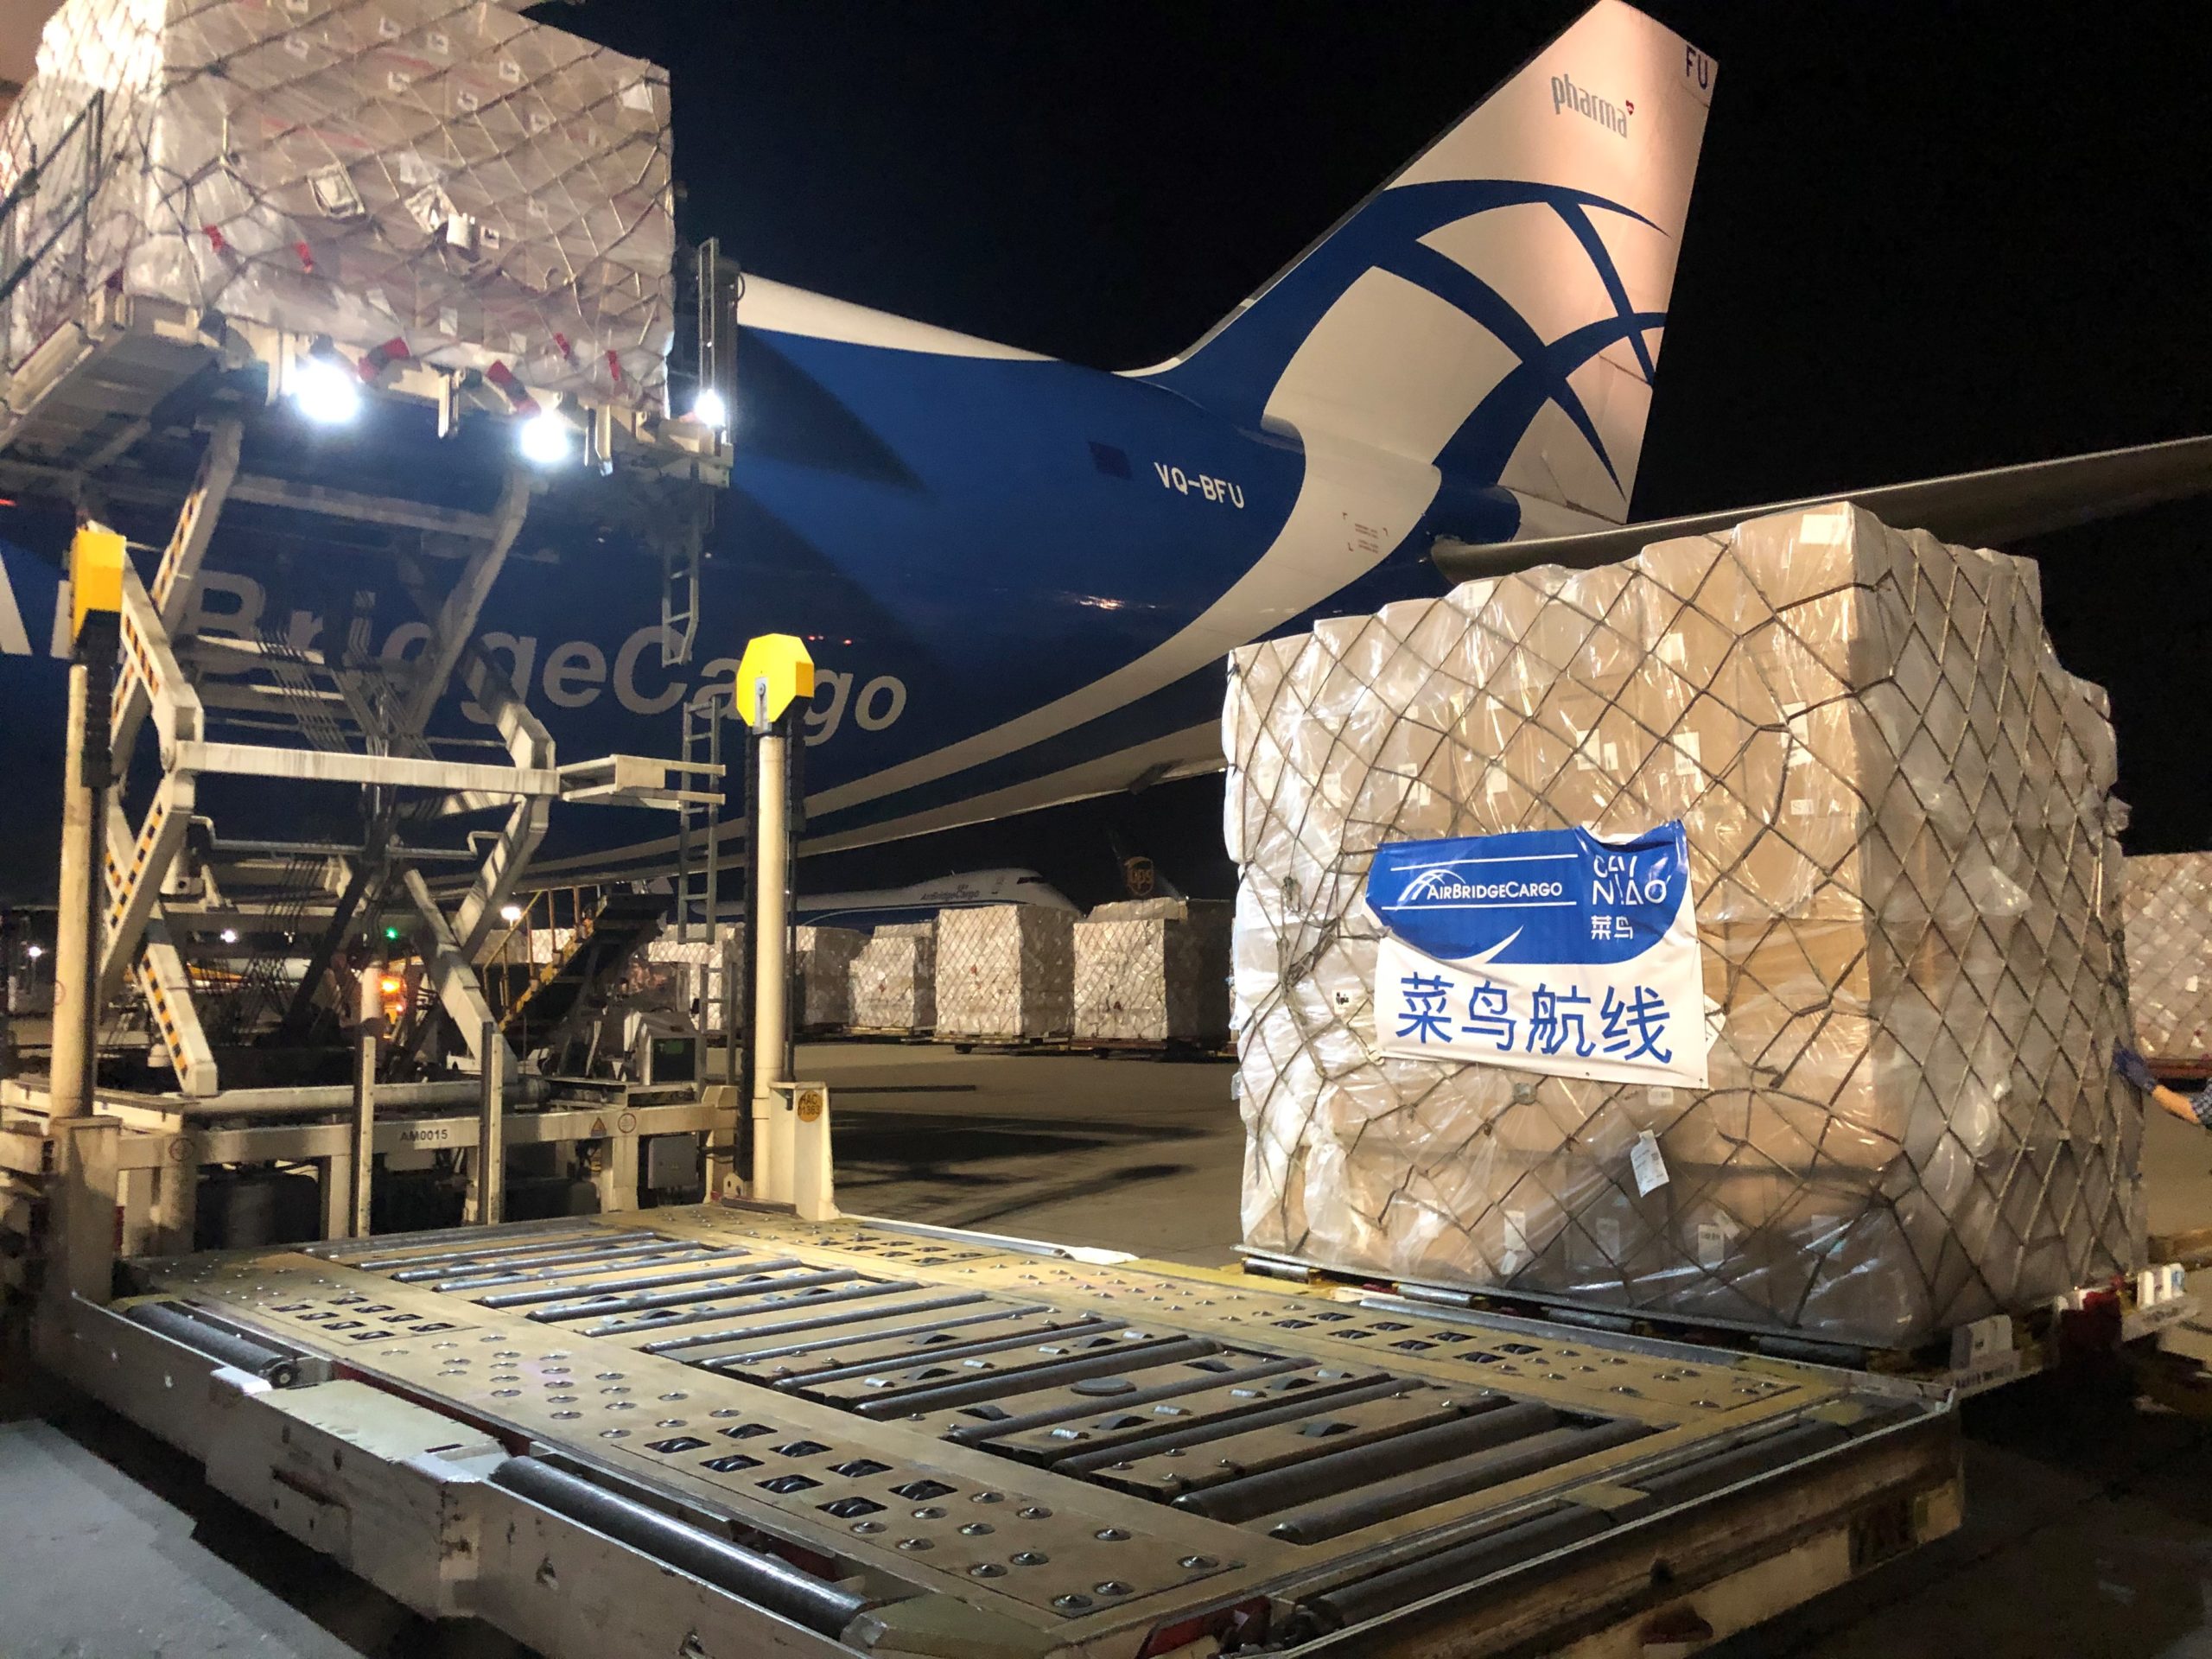 A Cainiao pallet with an AirBridgeCargo 747 tail in the background.